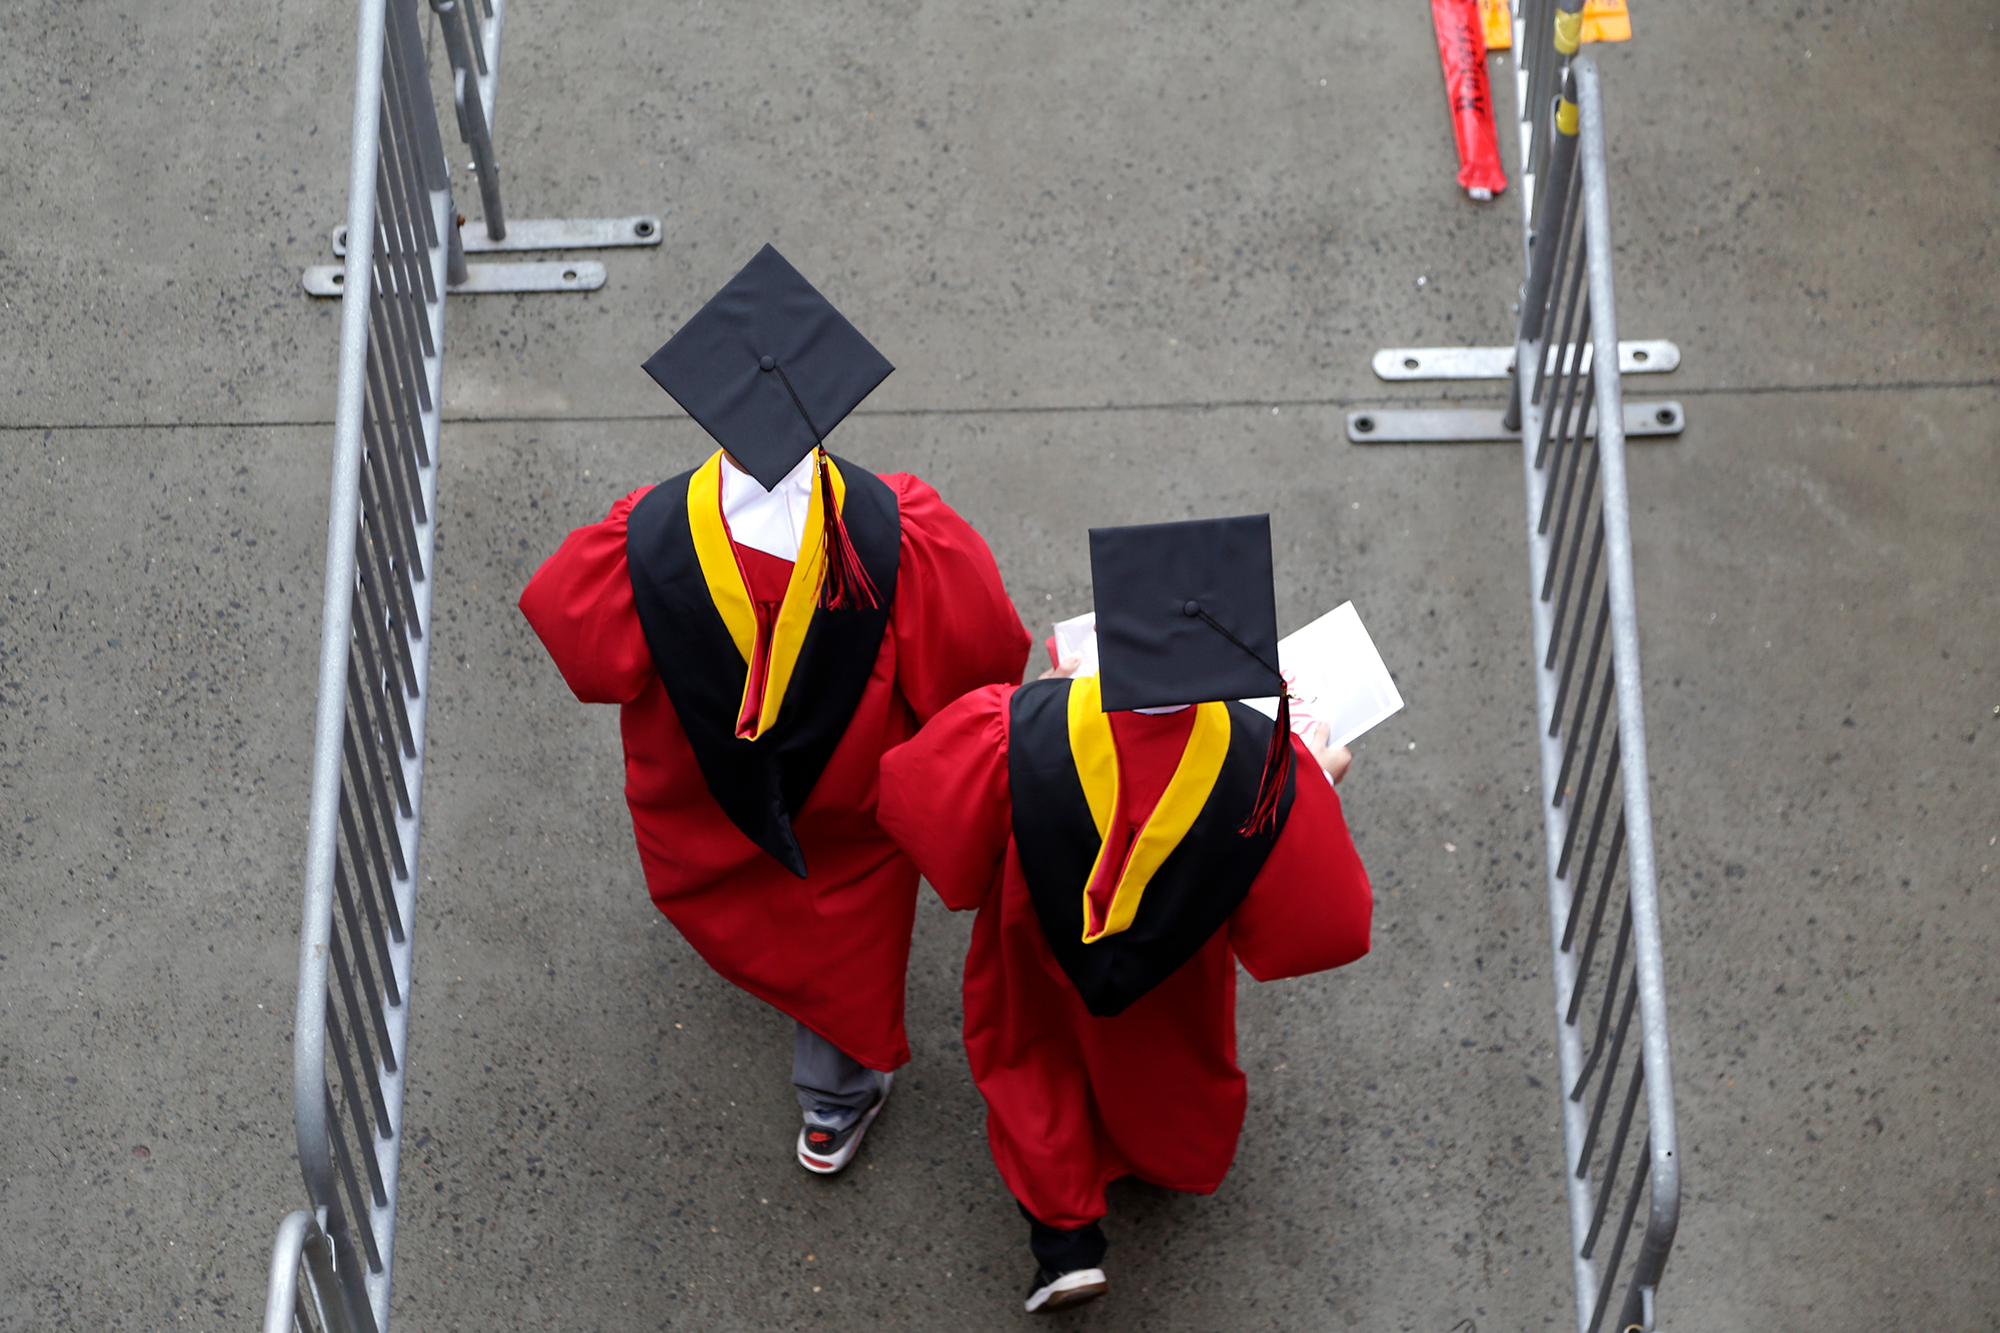 New graduates walk into the High Point Solutions Stadium before the start of the Rutgers University graduation ceremony in Piscataway Township, N.J., on May 13, 2018.